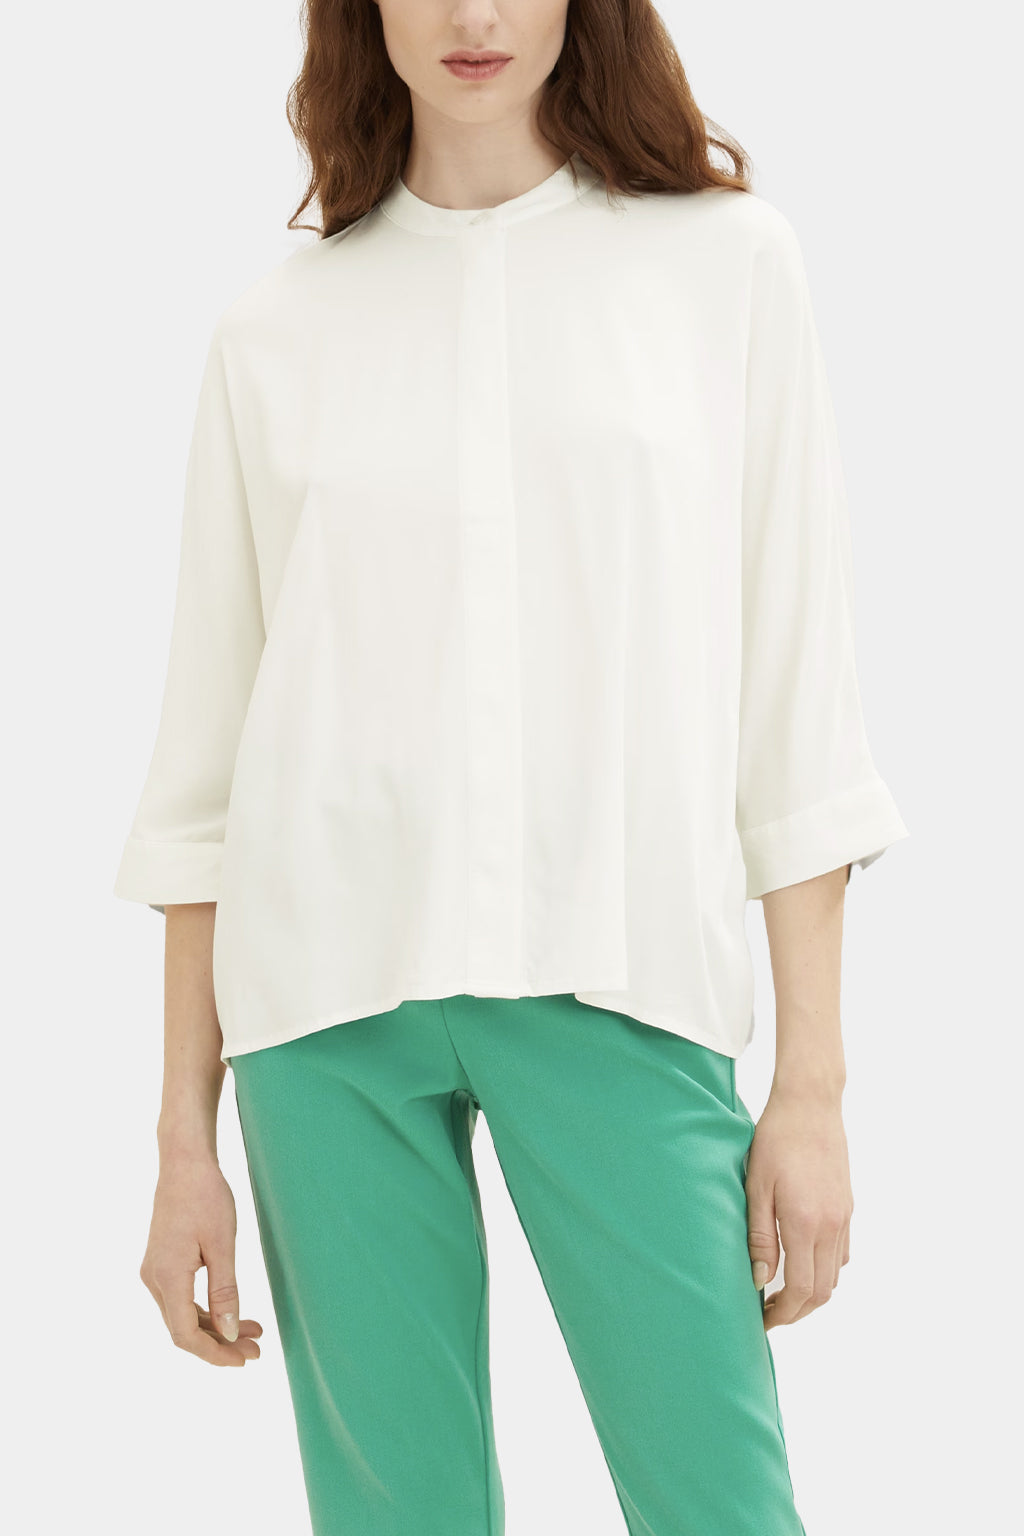 Tom Tailor - Blouse Loose Fit